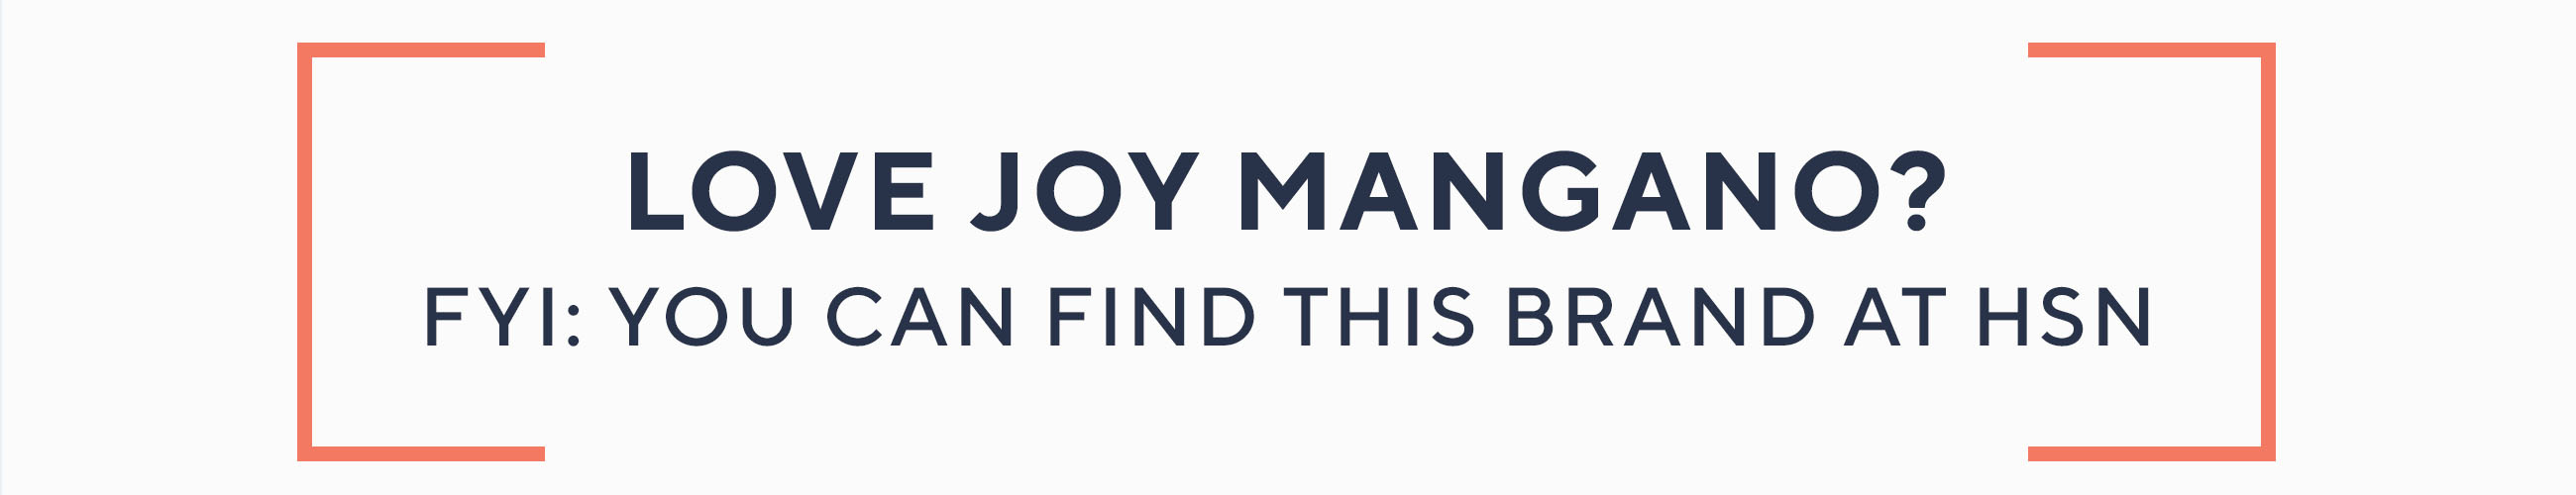 Love Joy Mangano?   FYI: You can find this brand at HSN